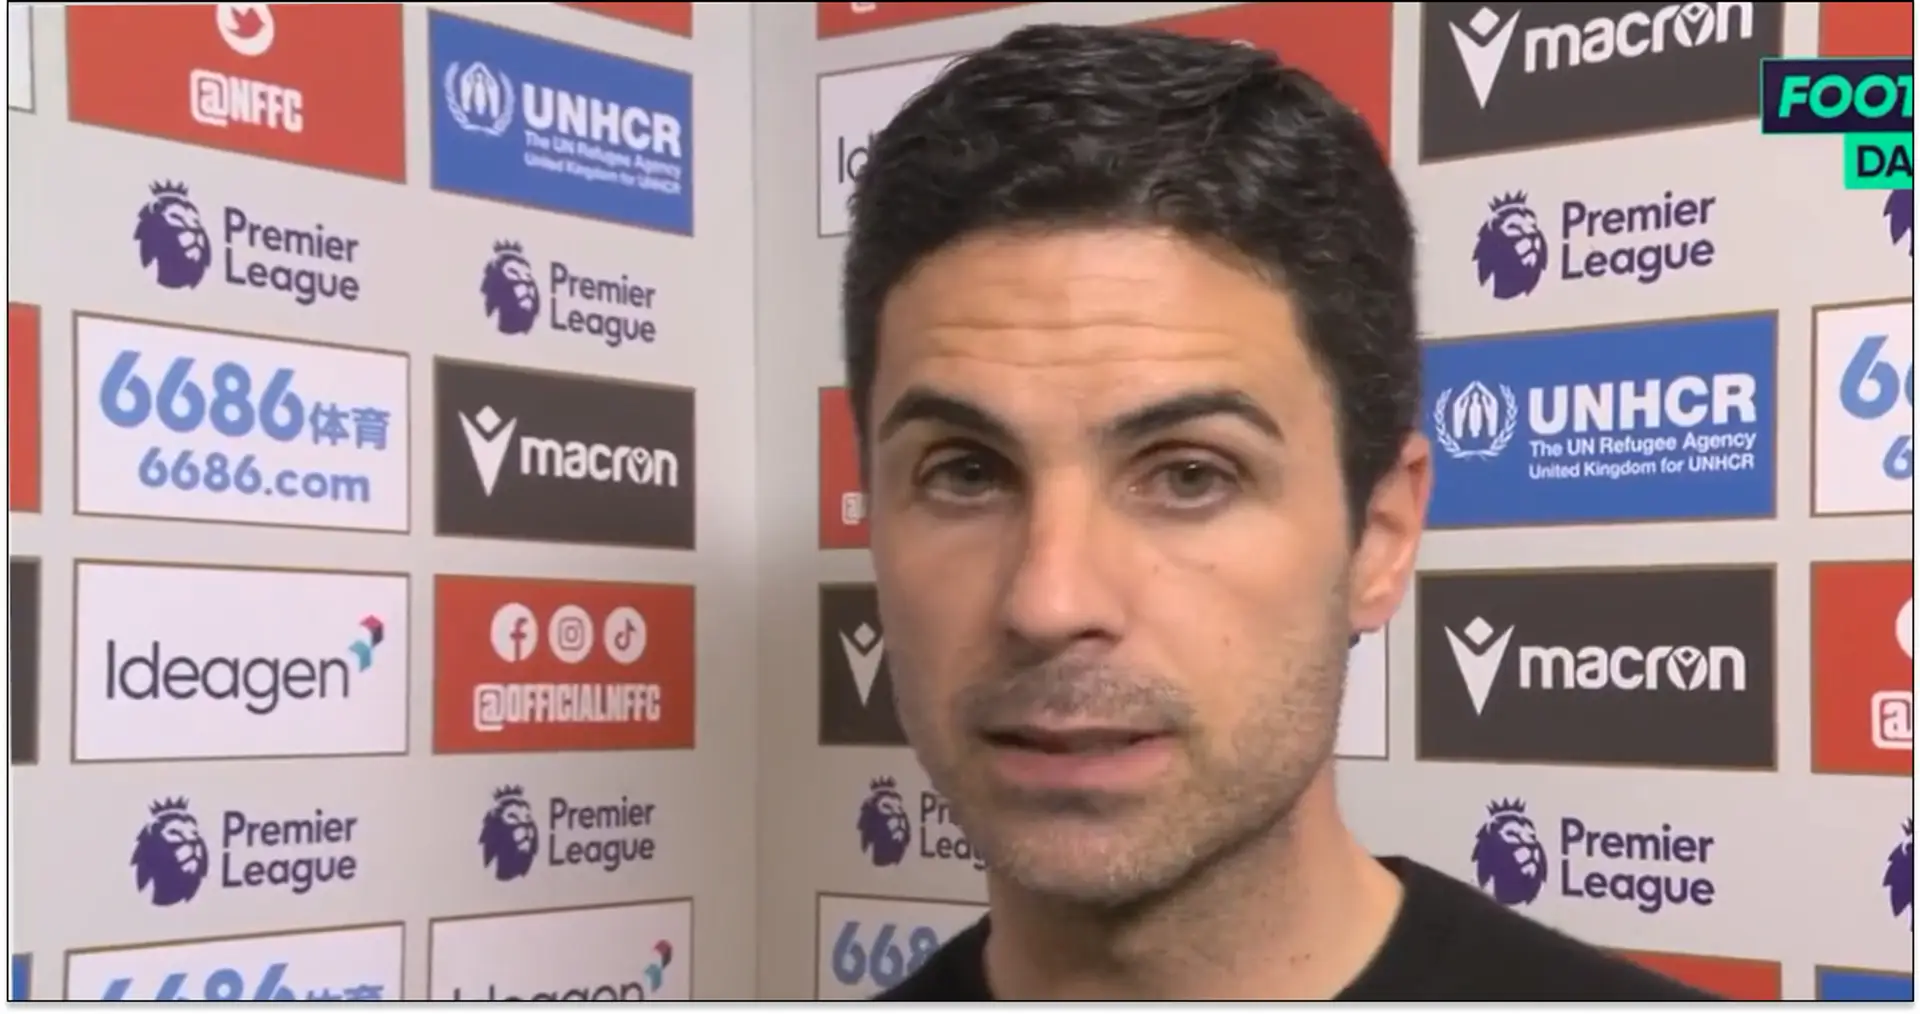 Arteta: 'I apologise because we generated belief we could win the title'